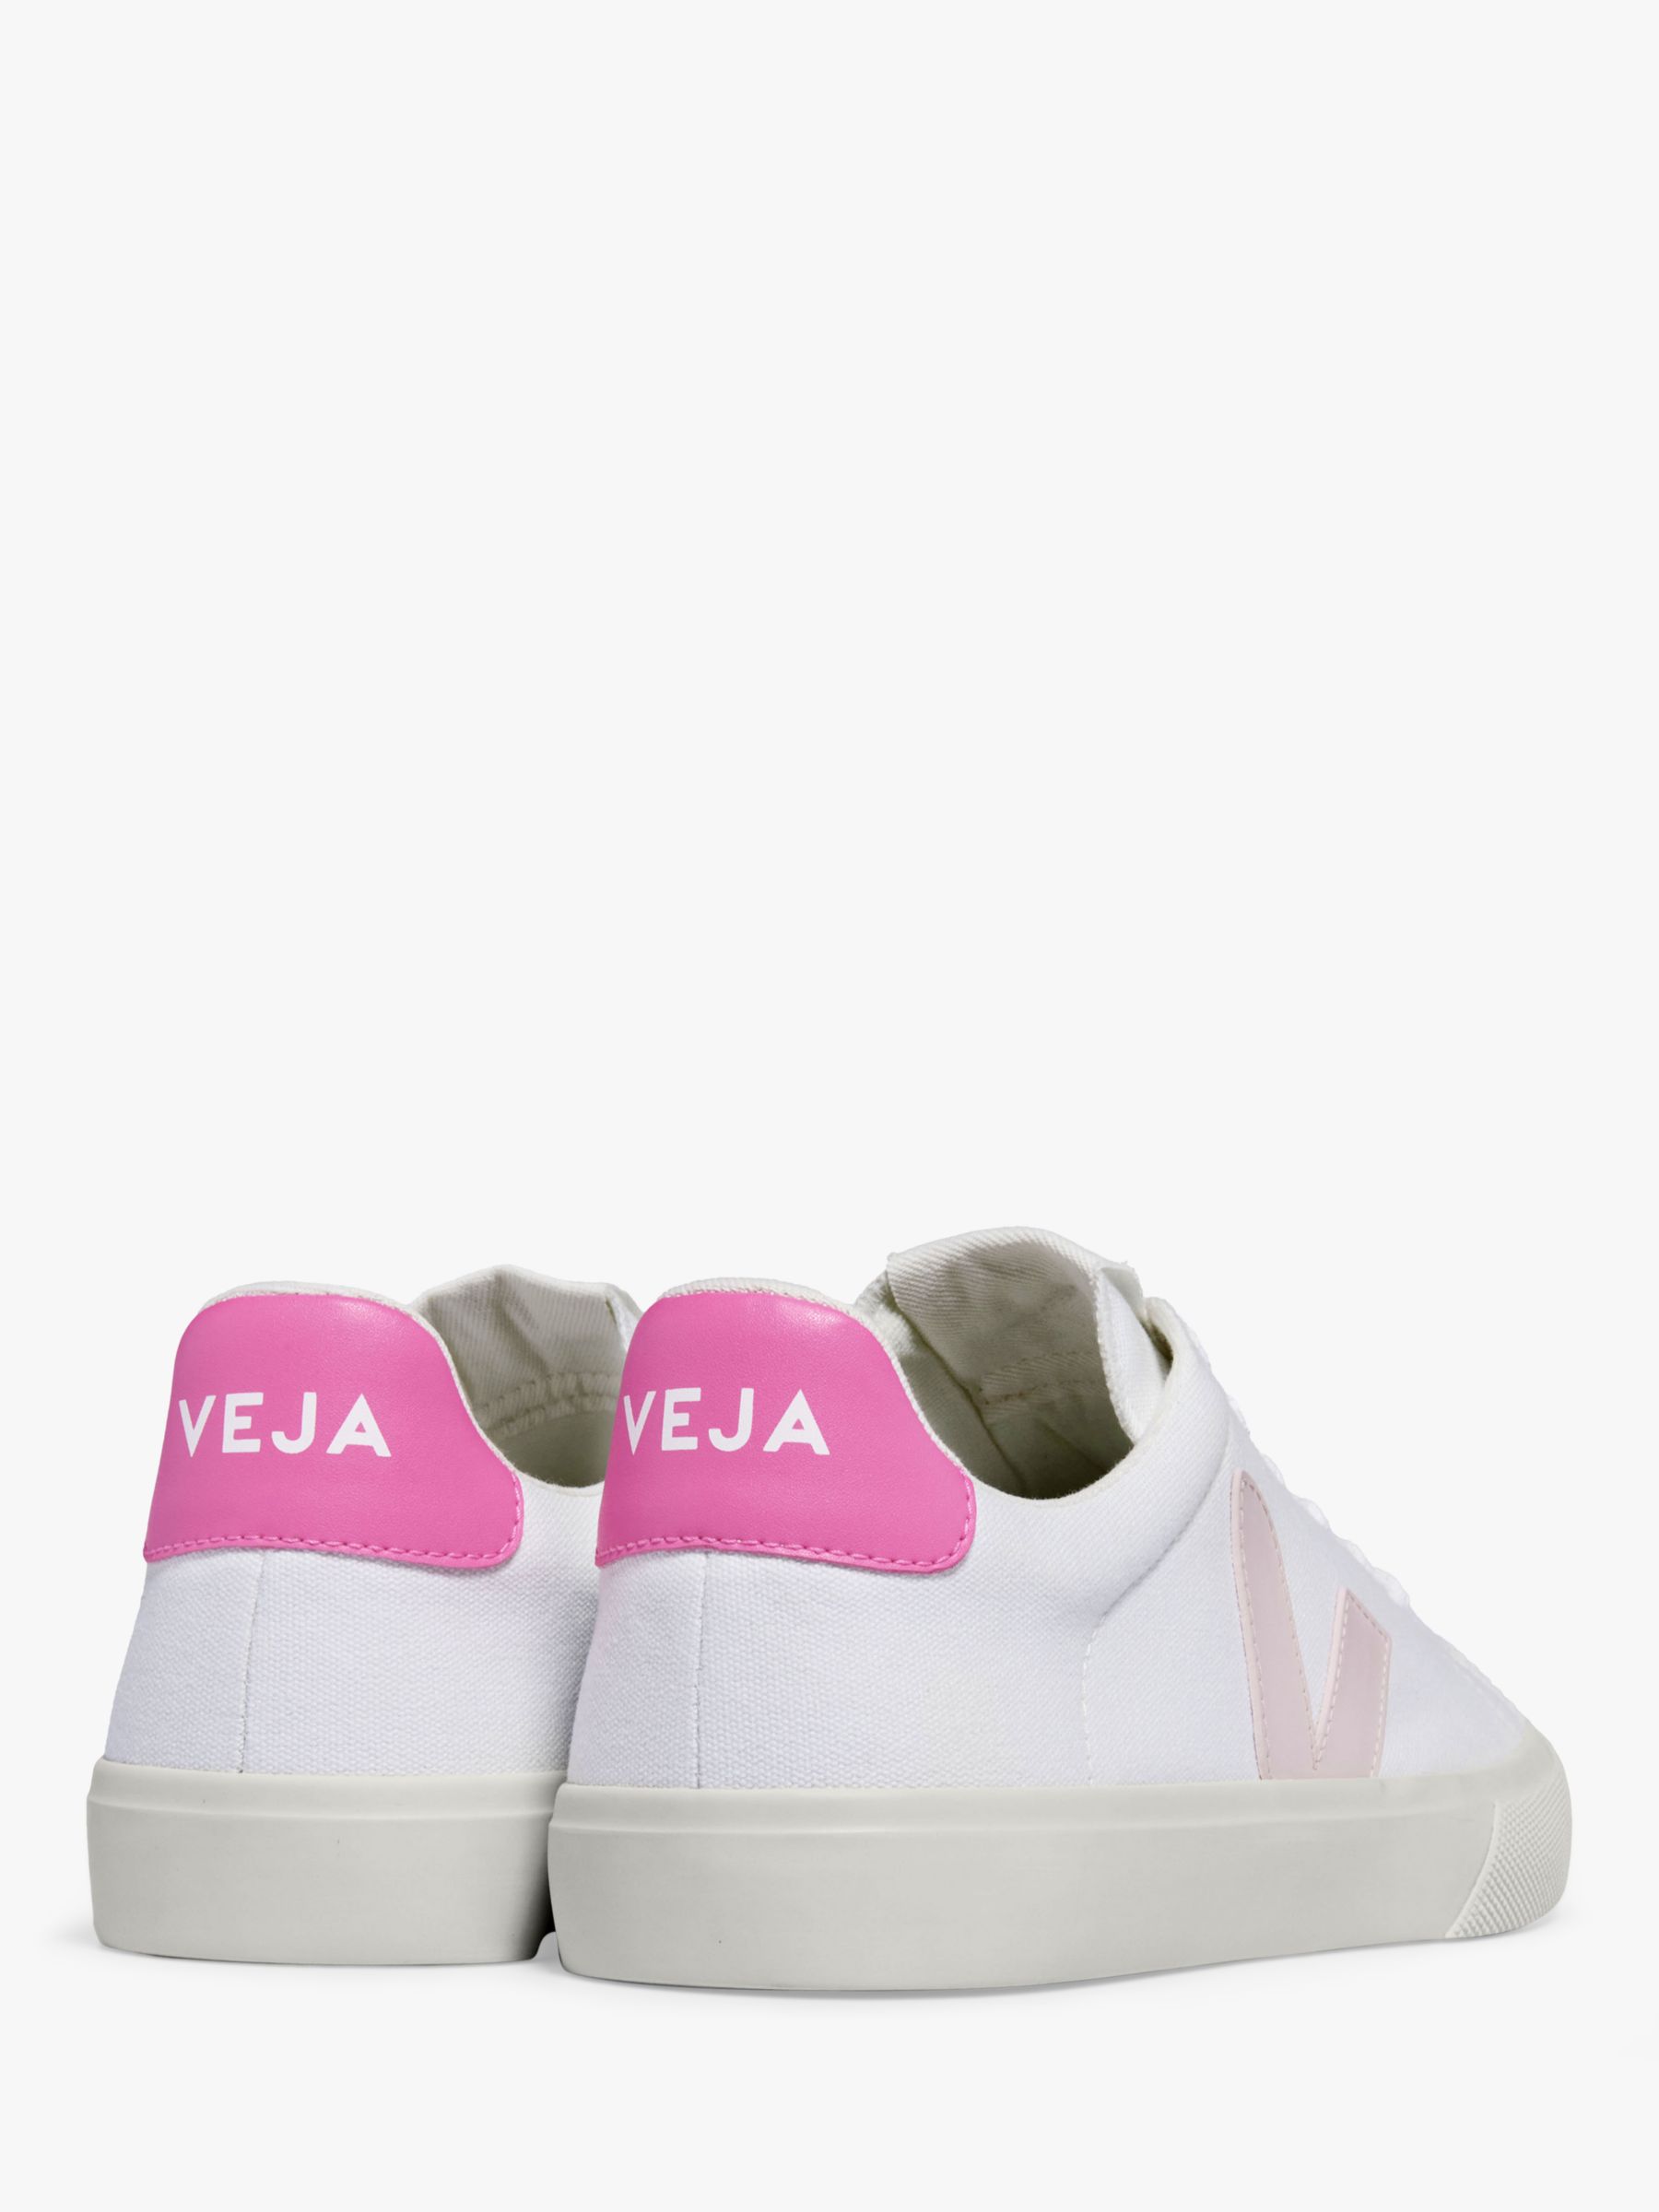 Buy VEJA Campo Canvas Trainers, White/Petal Online at johnlewis.com